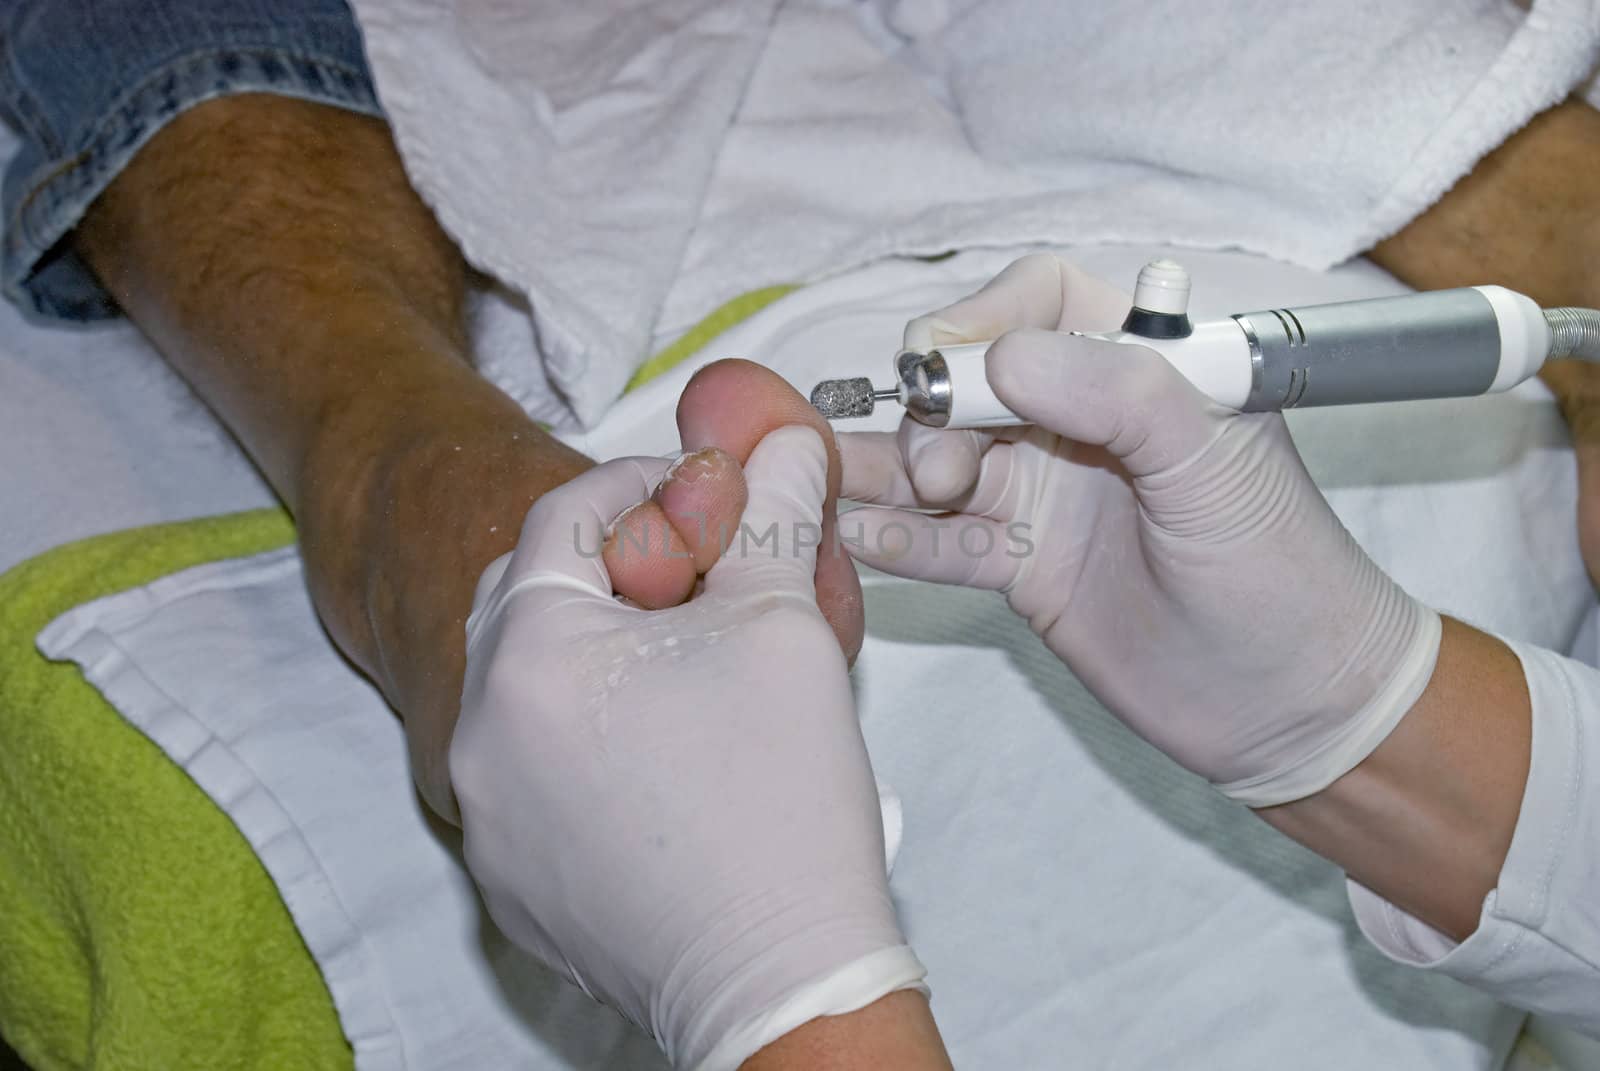 A pedicure removing hard skin from a client's feet